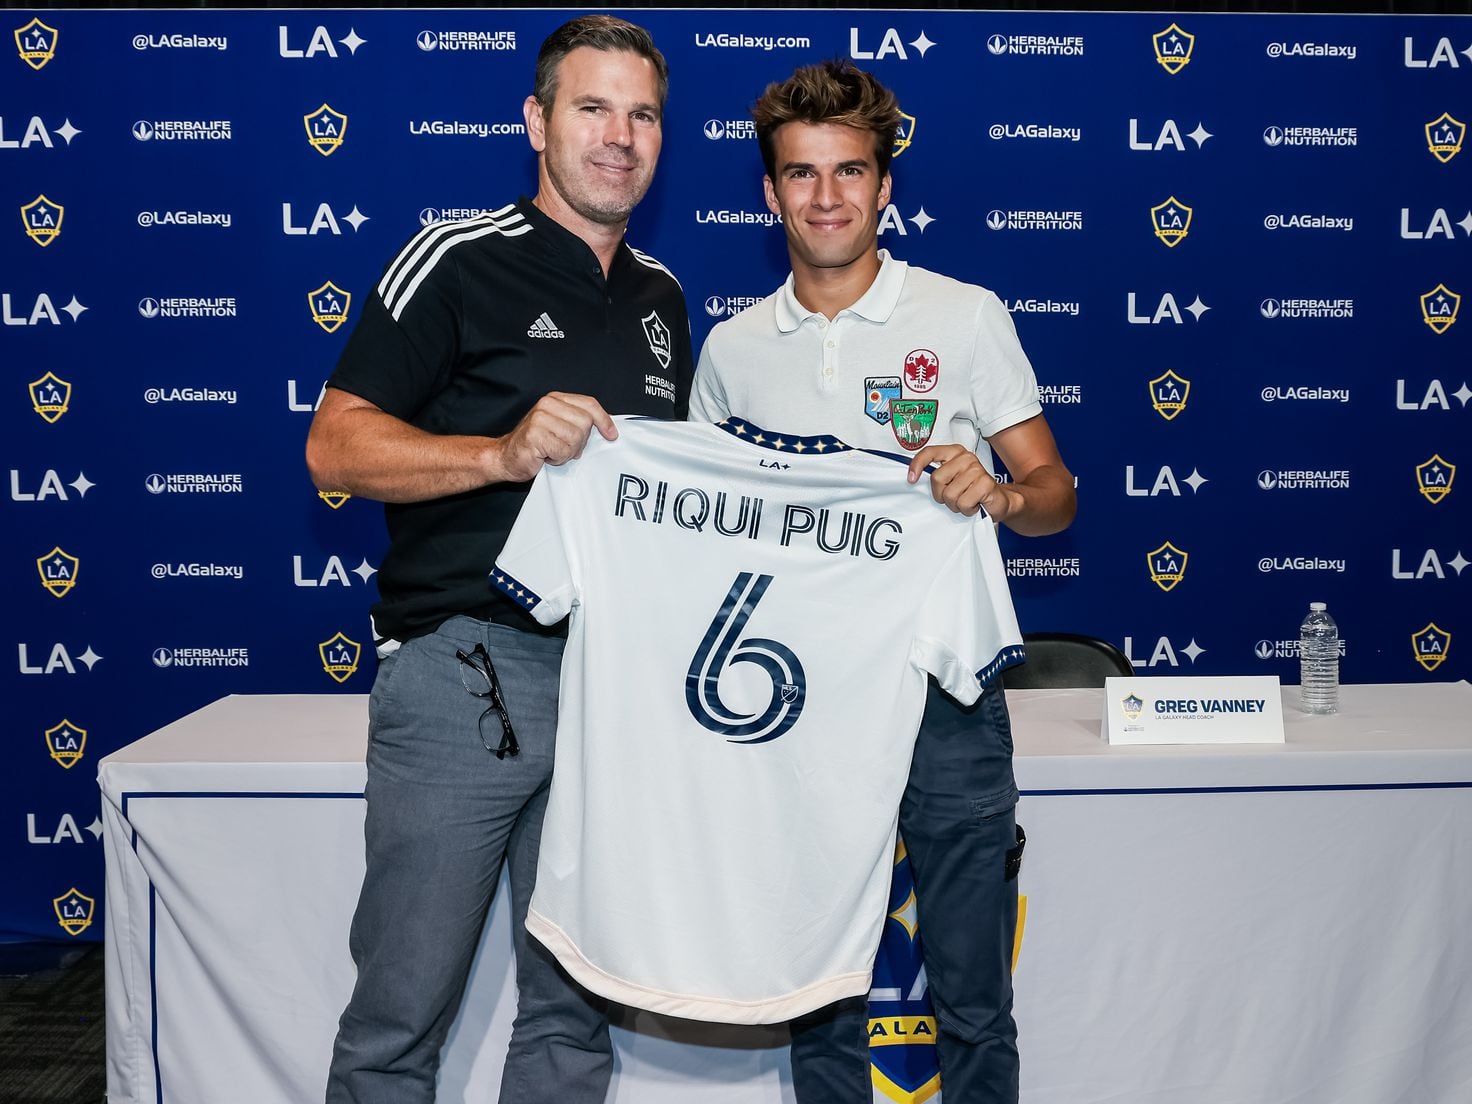 Riqui Puig: “I think more young players will come to MLS to